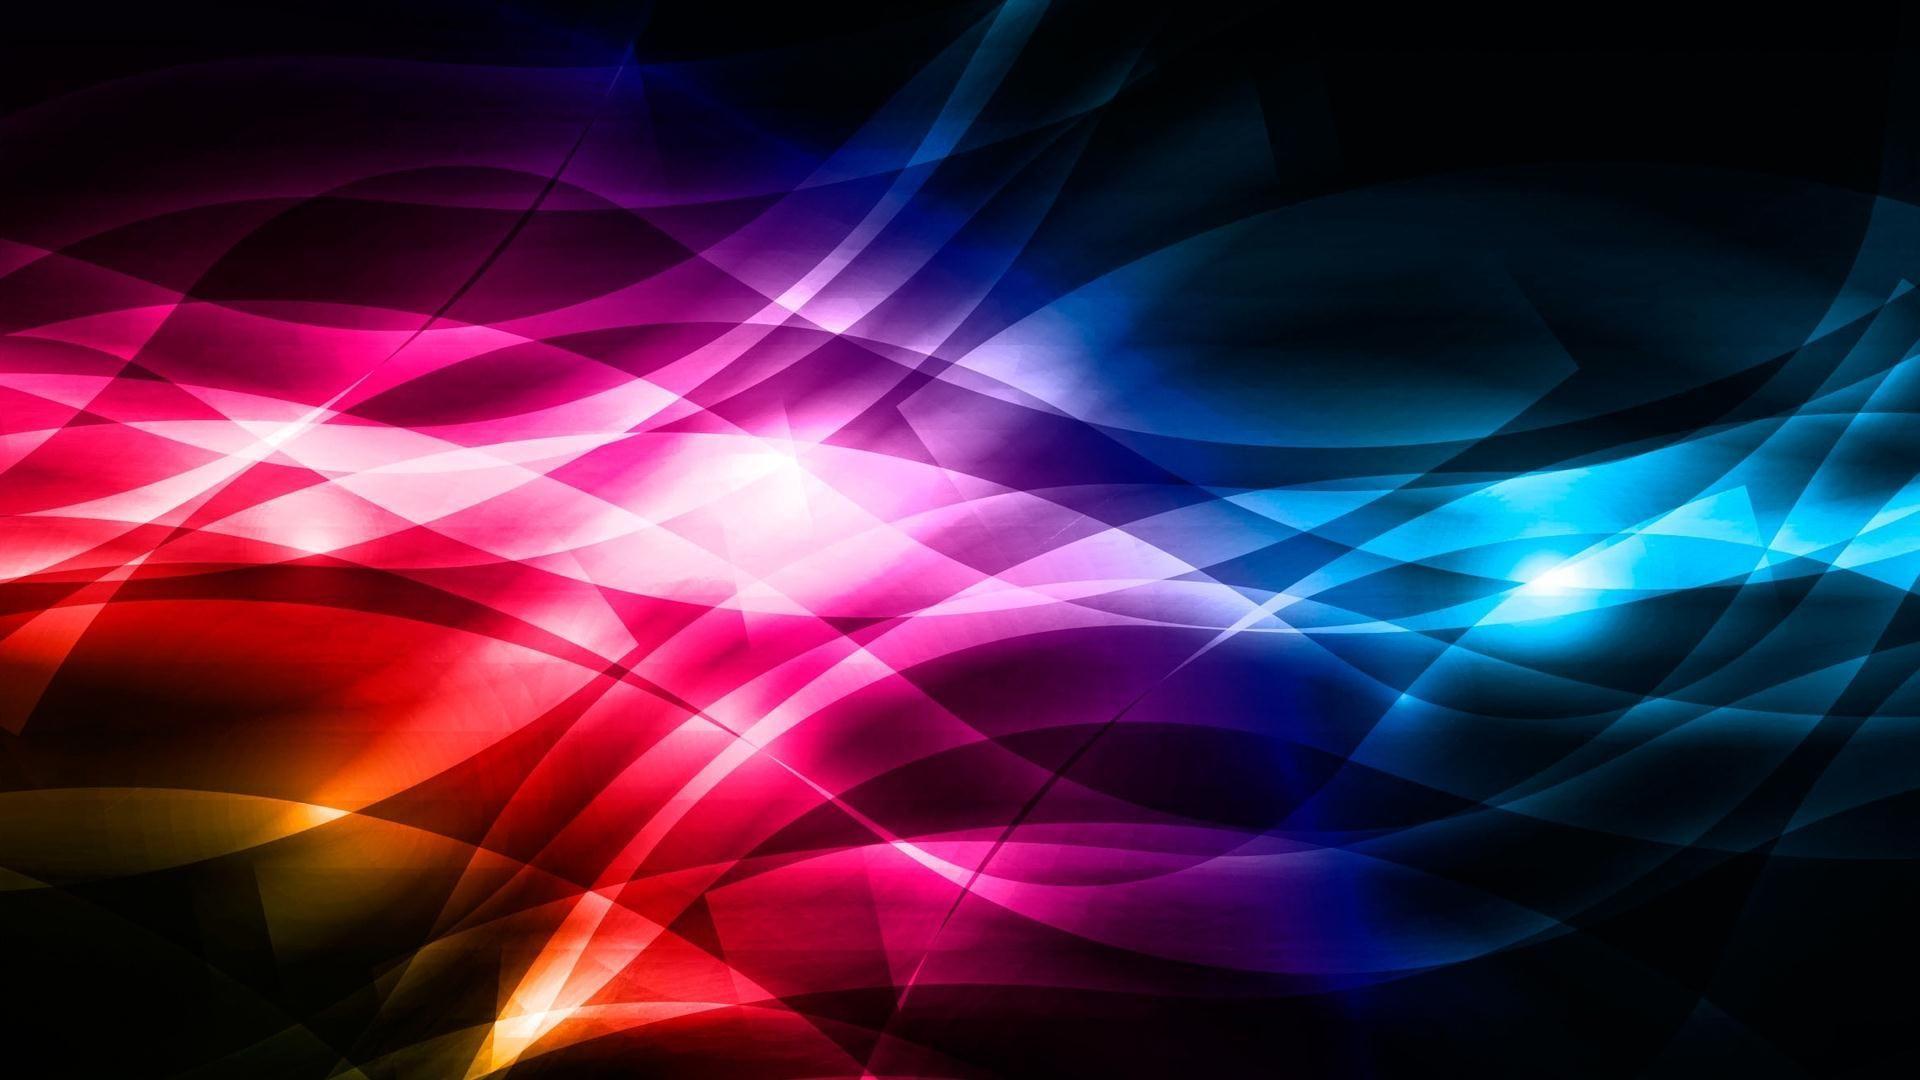 Colorful Graphic Wallpaper 21968 1920x1080 px